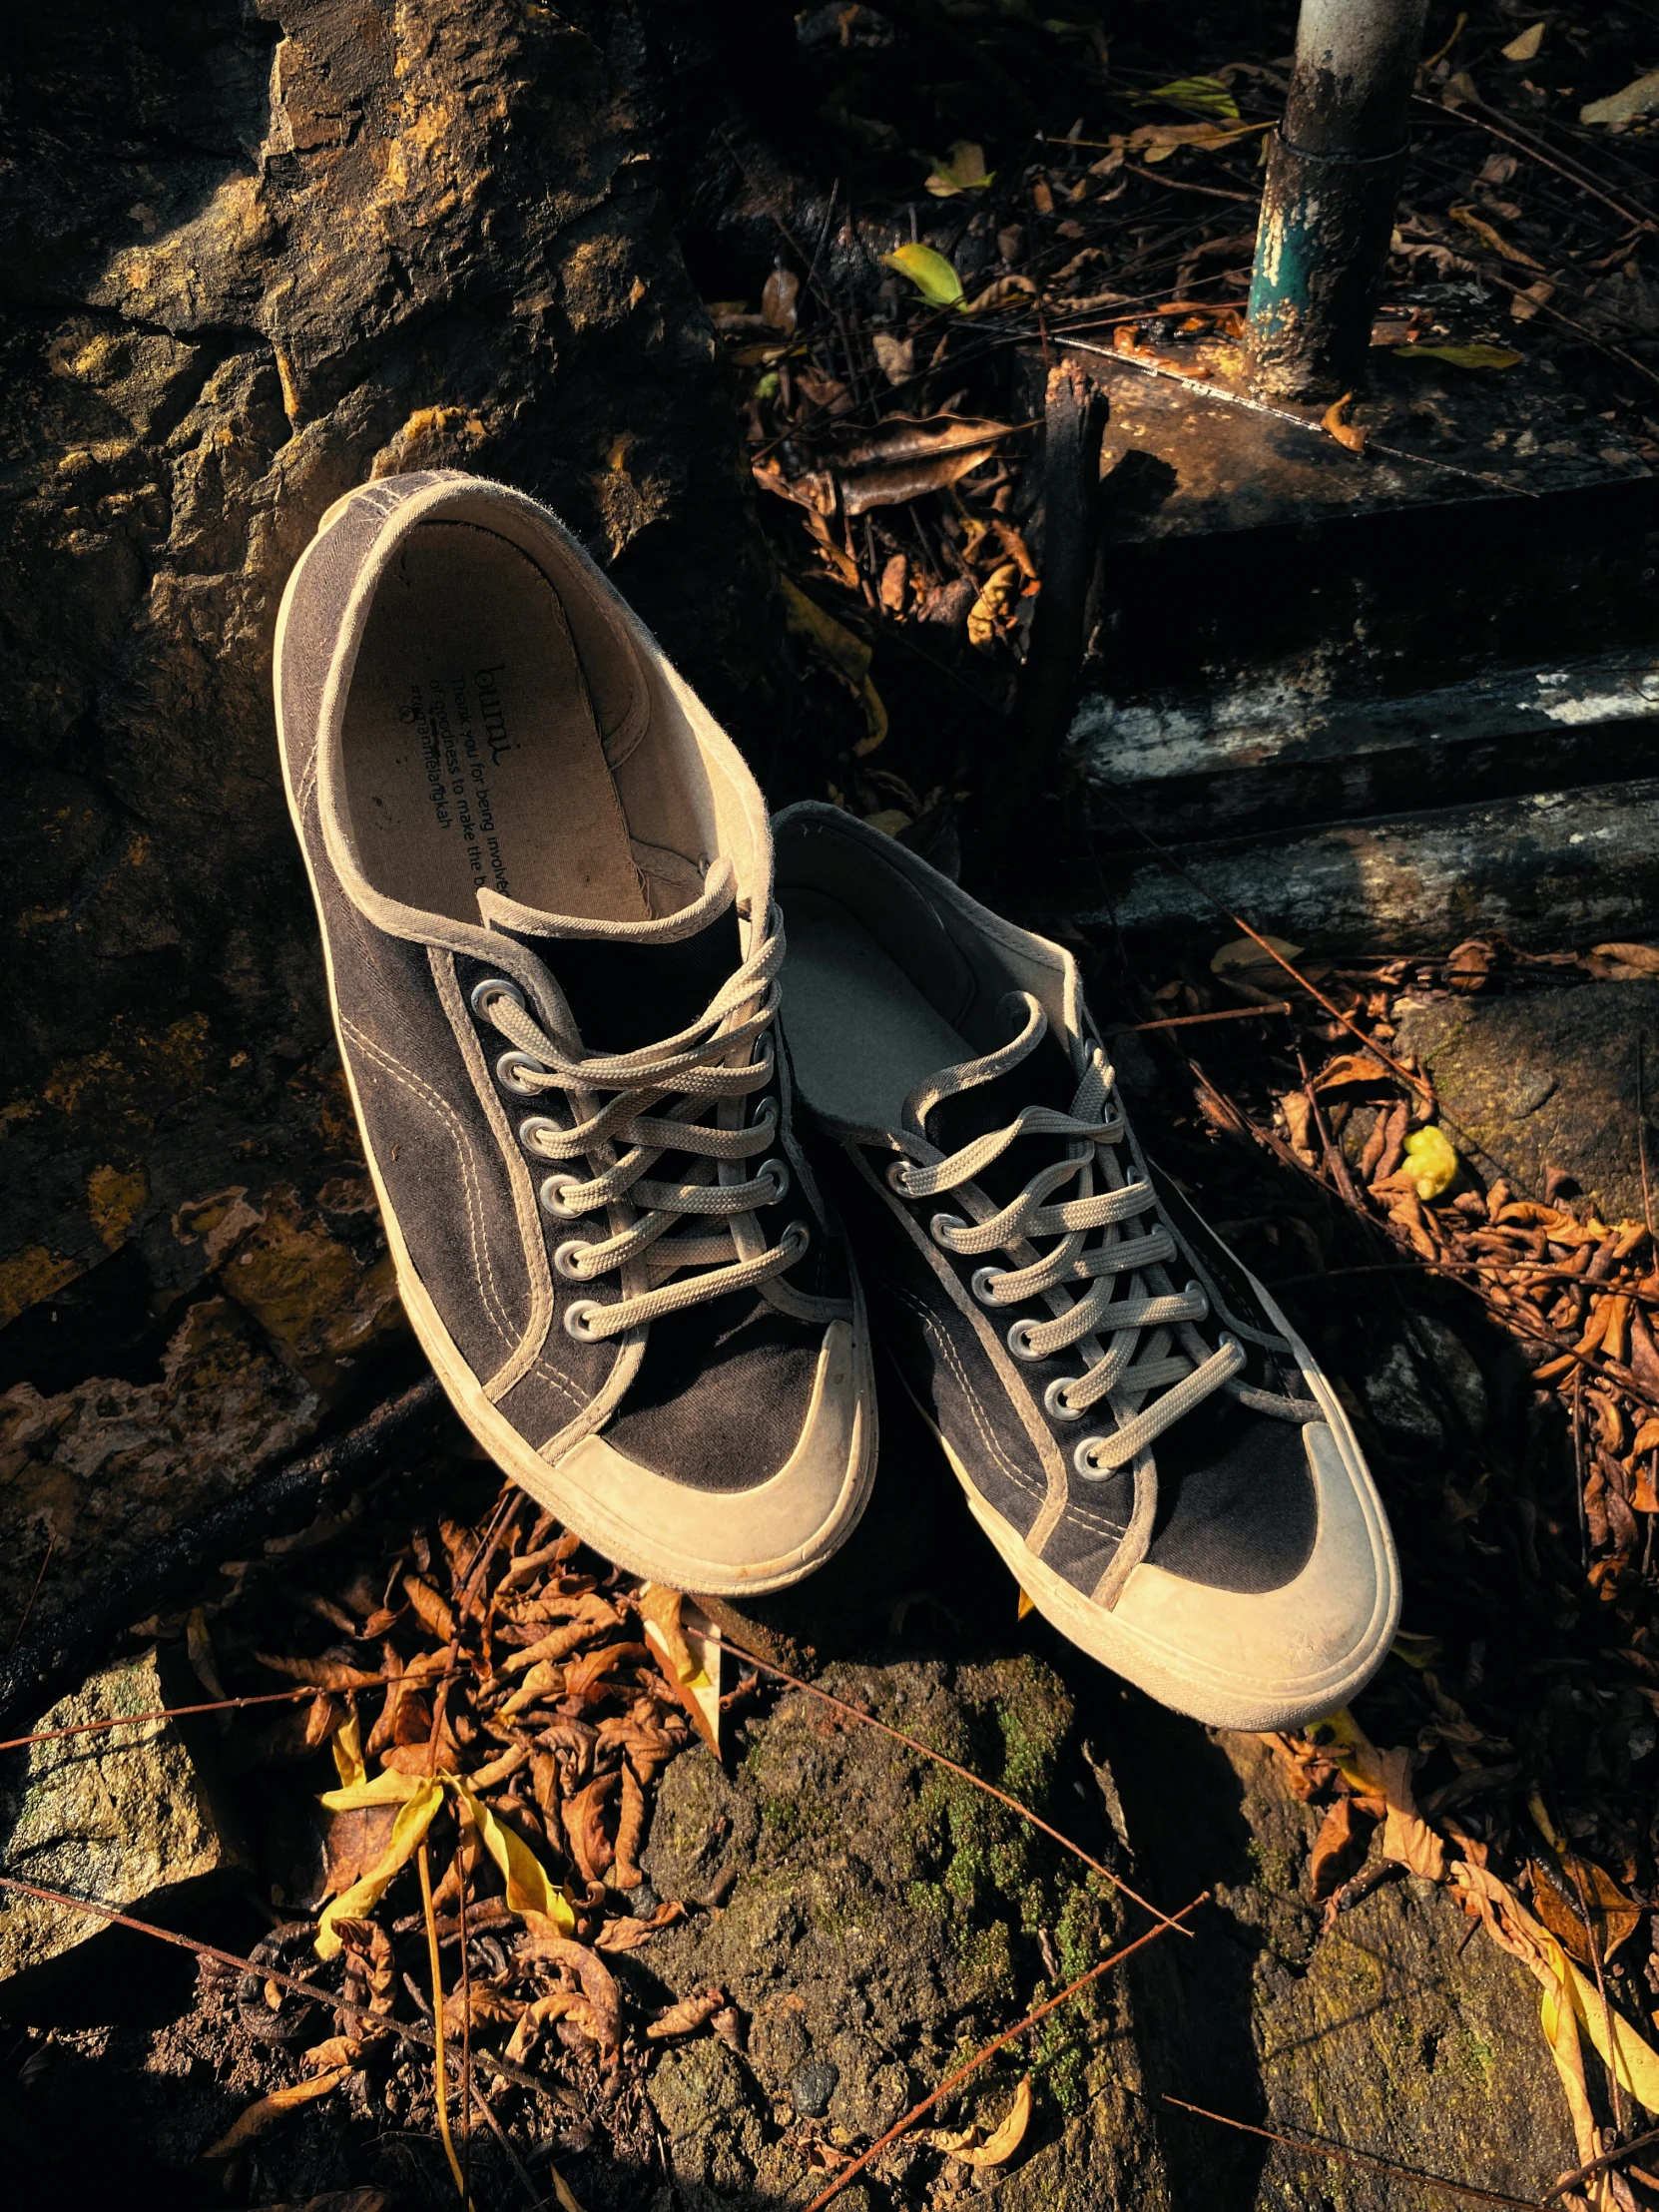 pair of worn and worn grey tennis shoes in leaf strewn area